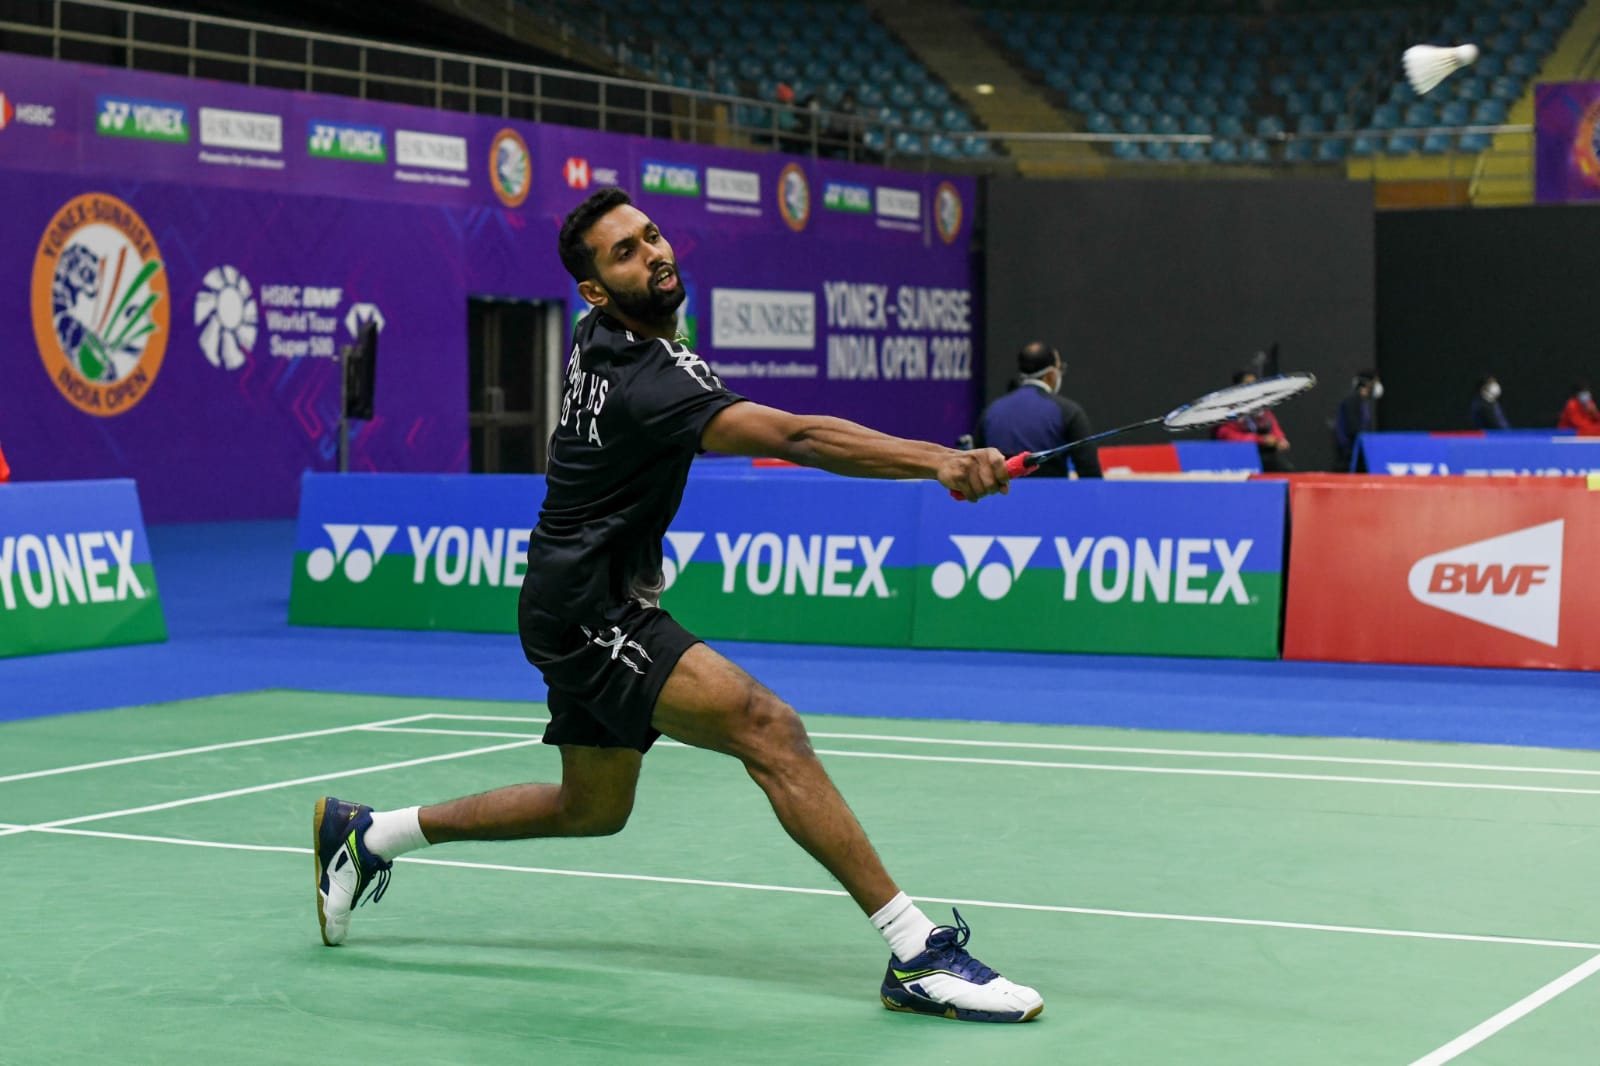 Badminton World Tour Finals Highlights: HS Prannoy loses, Viktor Axelsen, Loh Kean Yew & Anthony Ginting clinch victories on Day1 of BWF World Tour Final - Watch HighlightsUpdates